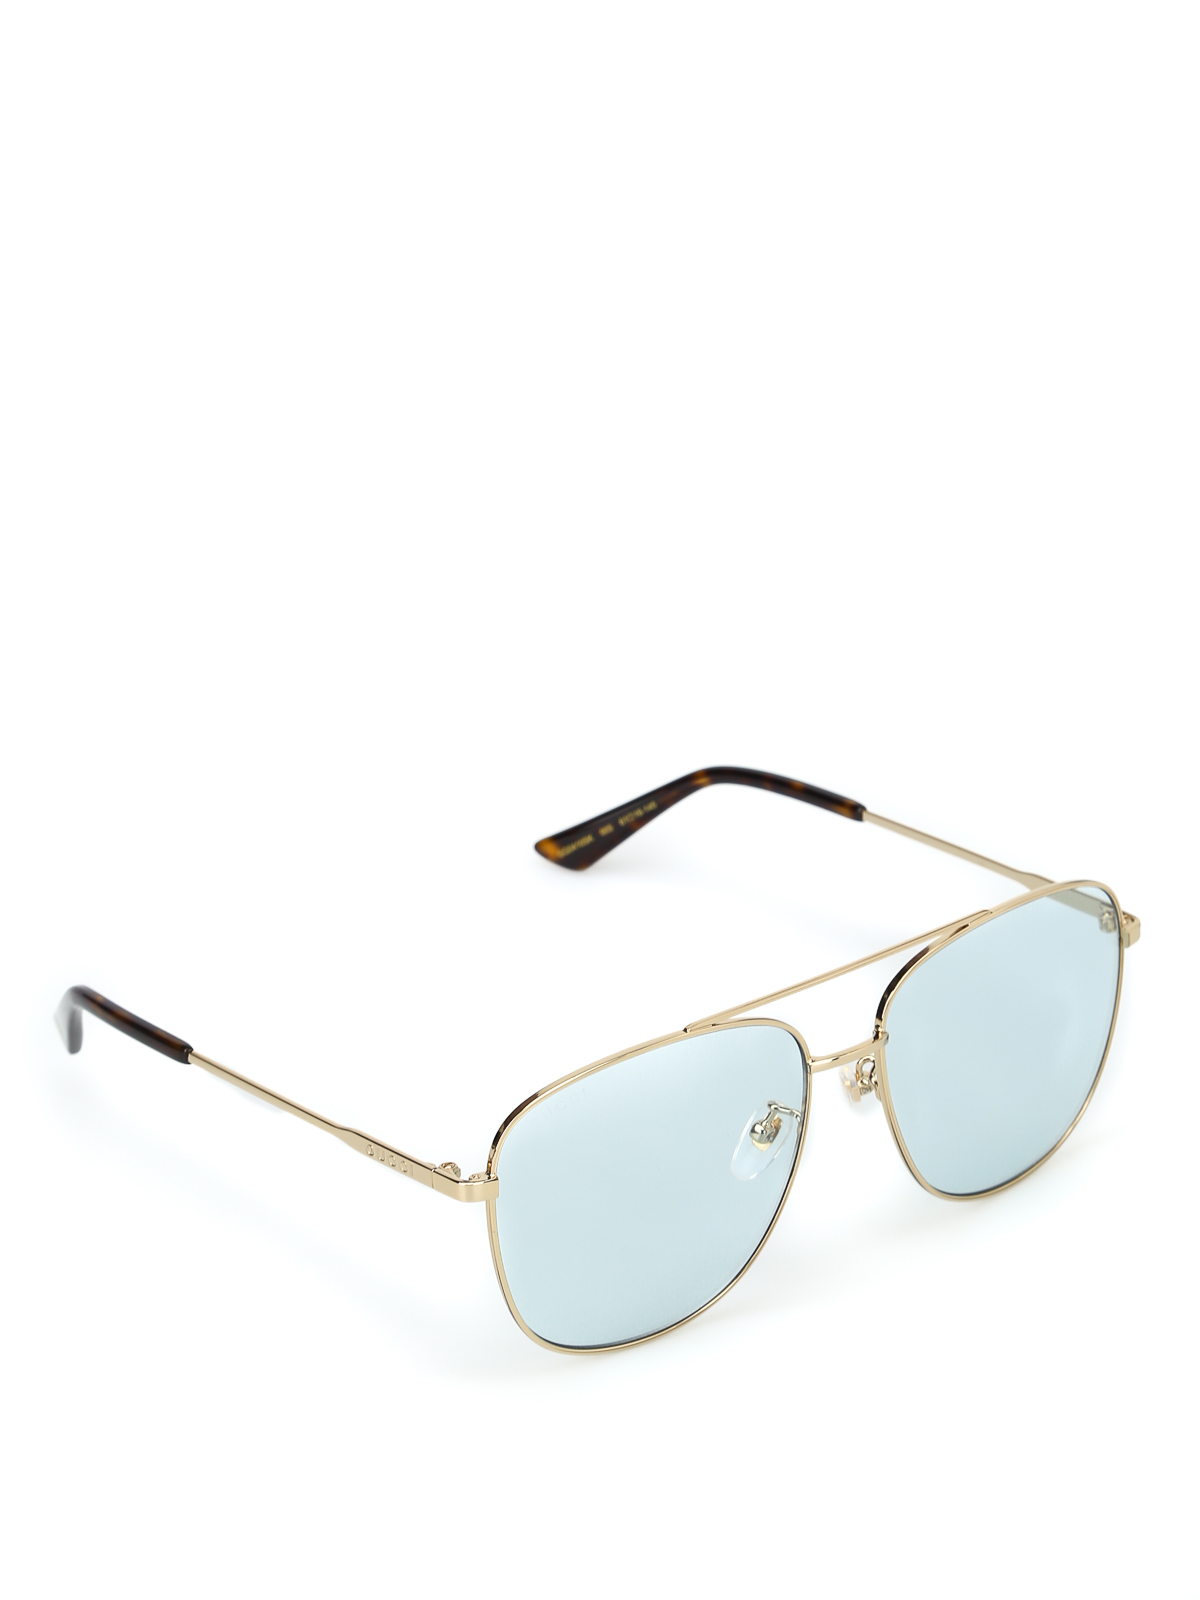 Gucci - Golden sunglasses with light 